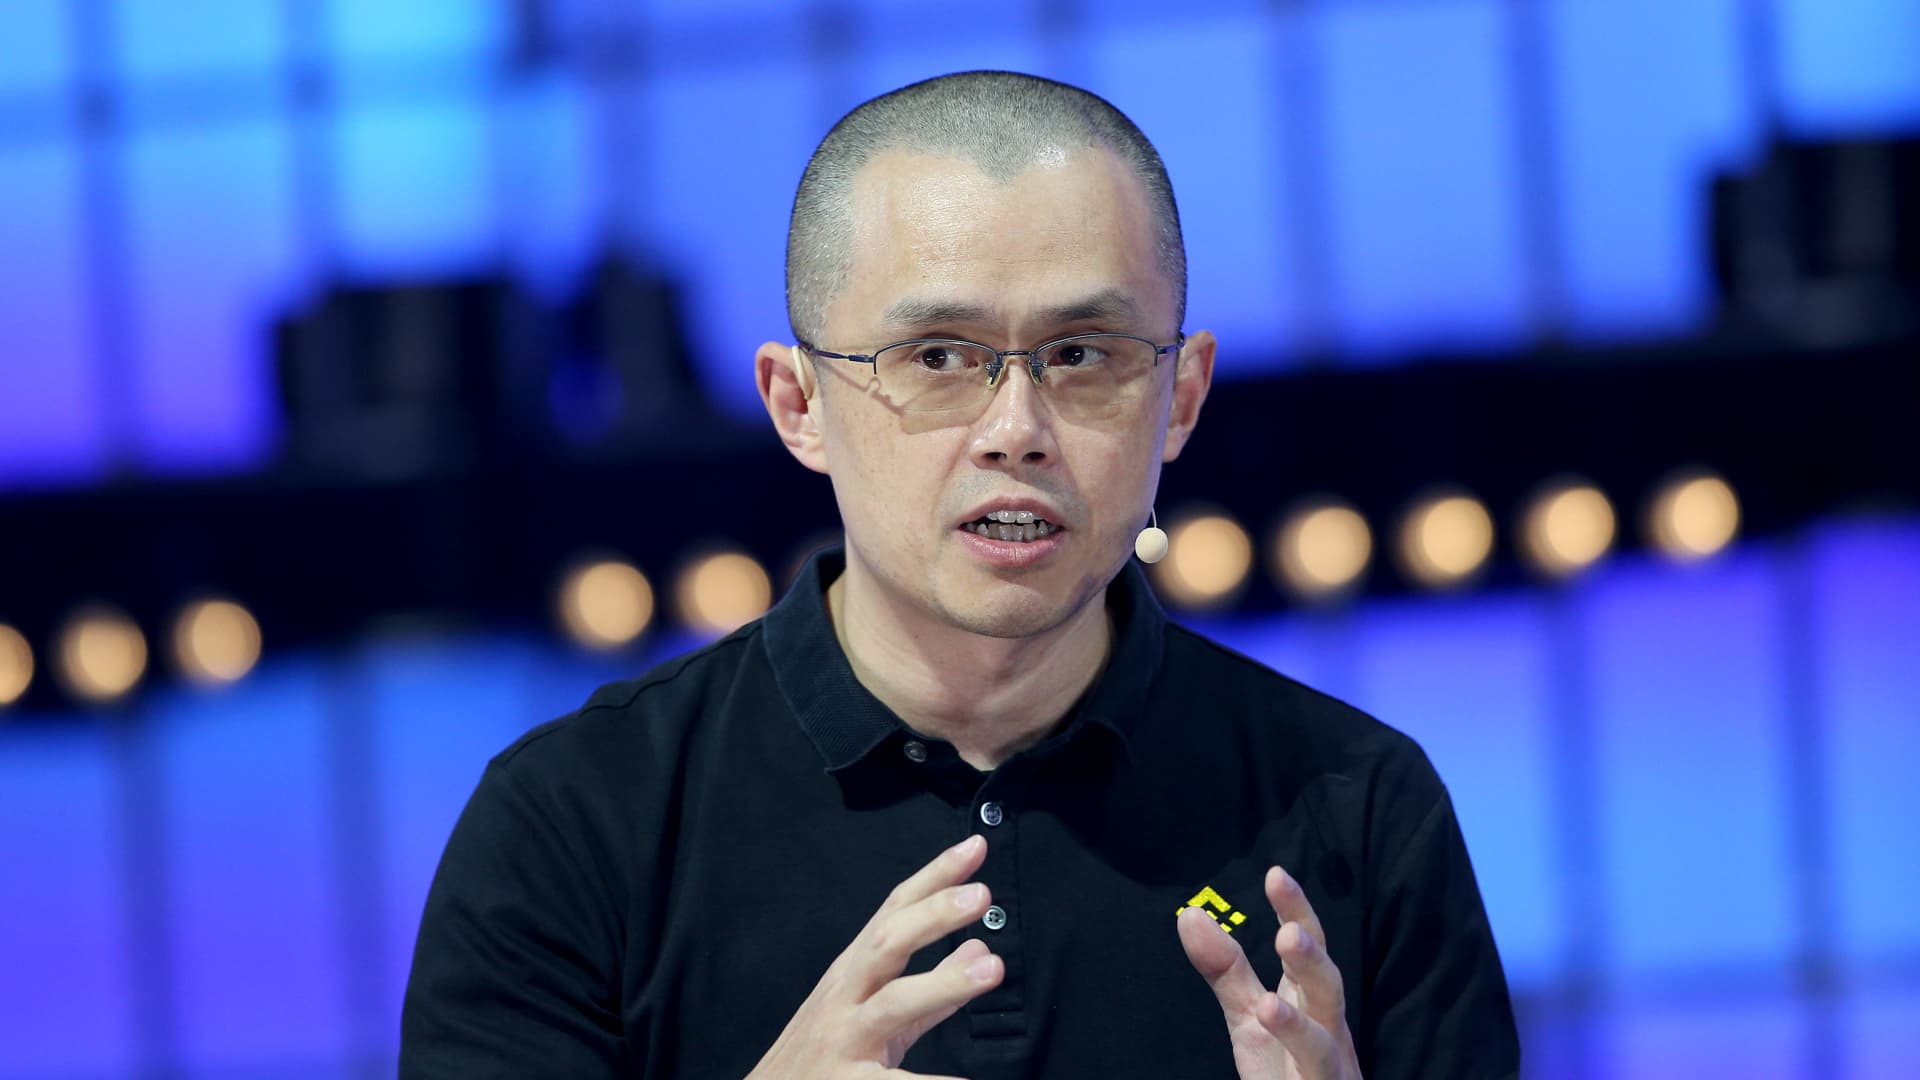 No ‘immediate route forward’: CFTC is speaking to Binance soon after launching authorized motion, official claims